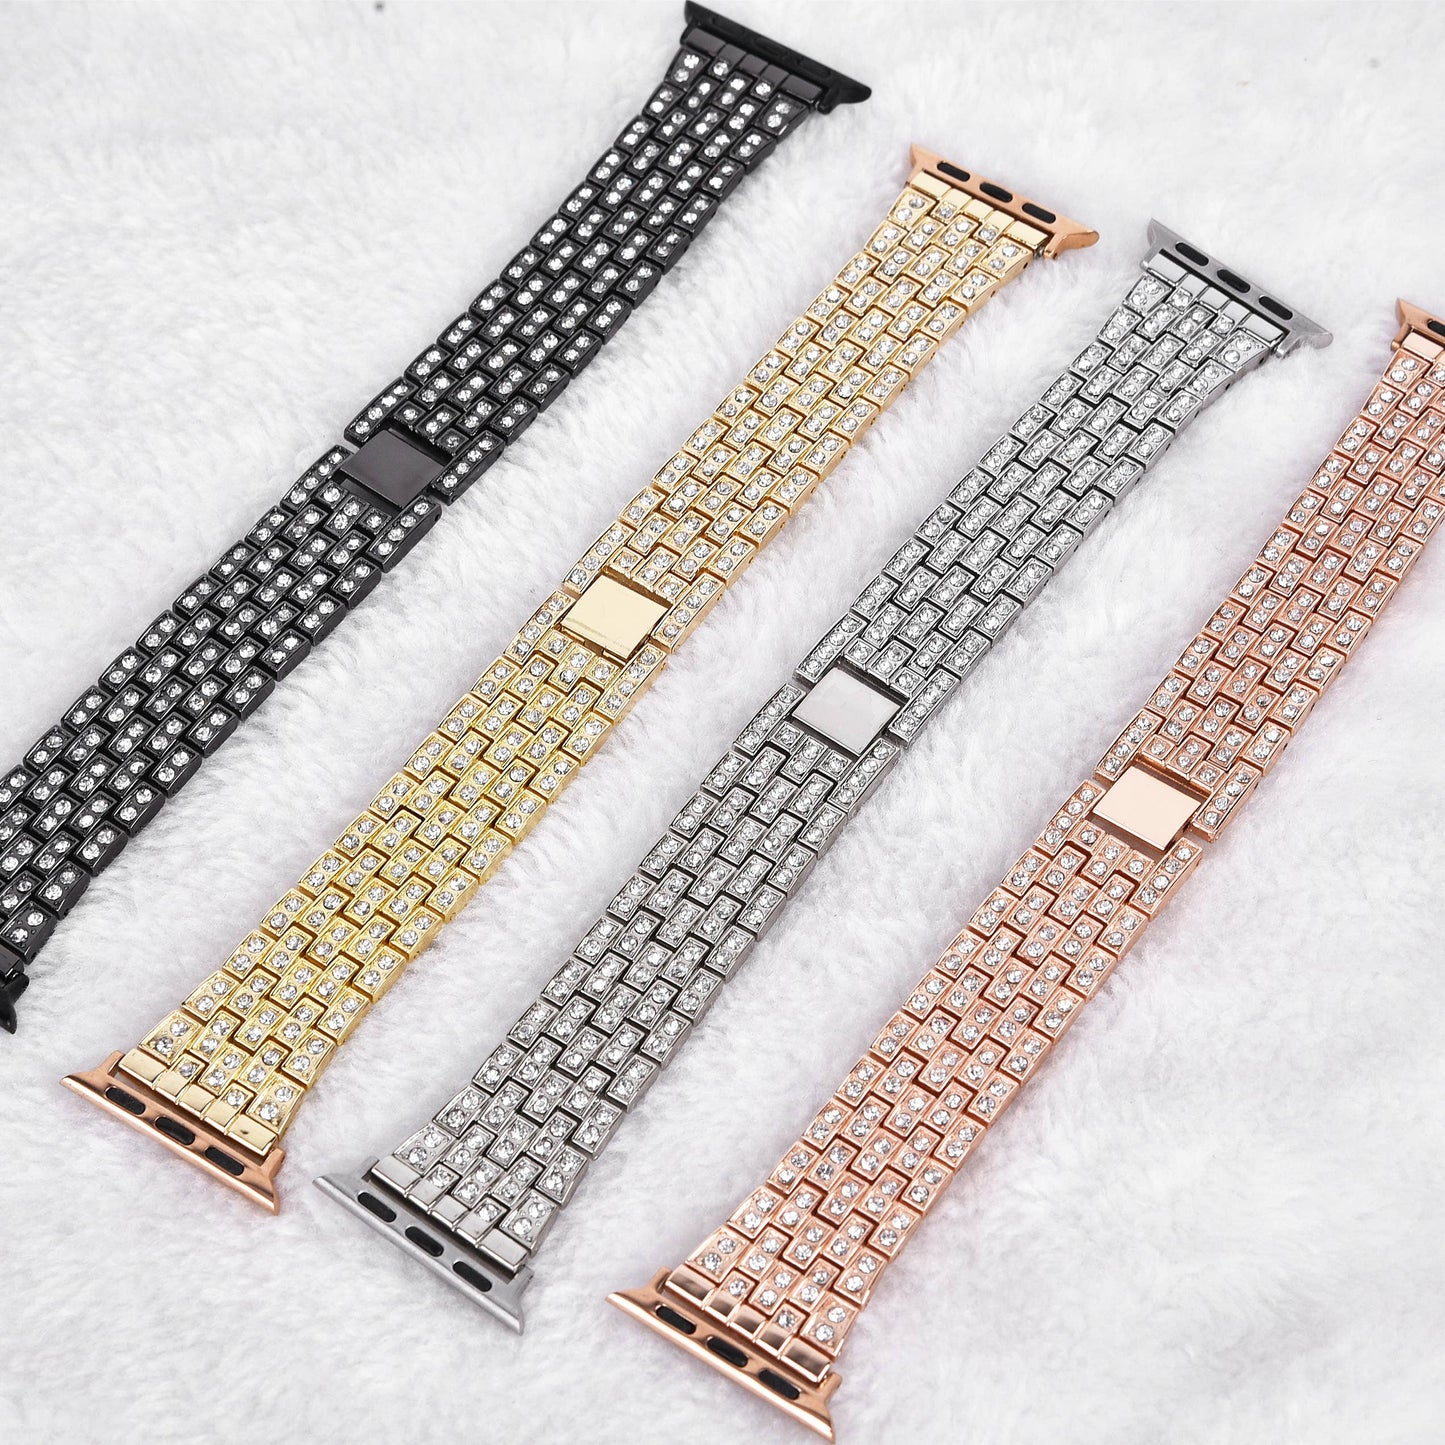 Crystal Rhinestone Sparkling Band for Apple Watch All Series